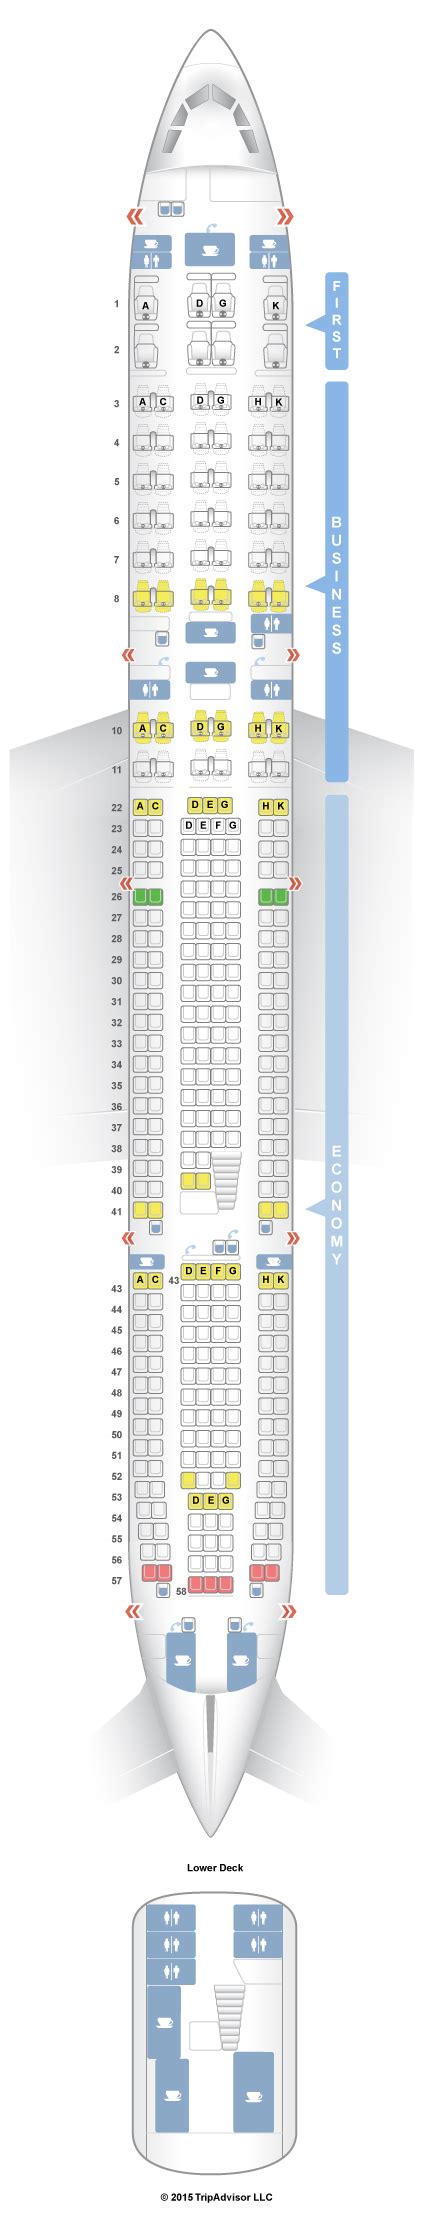 Seat Map And Seating Chart Lufthansa Airbus A Four Class Layout My